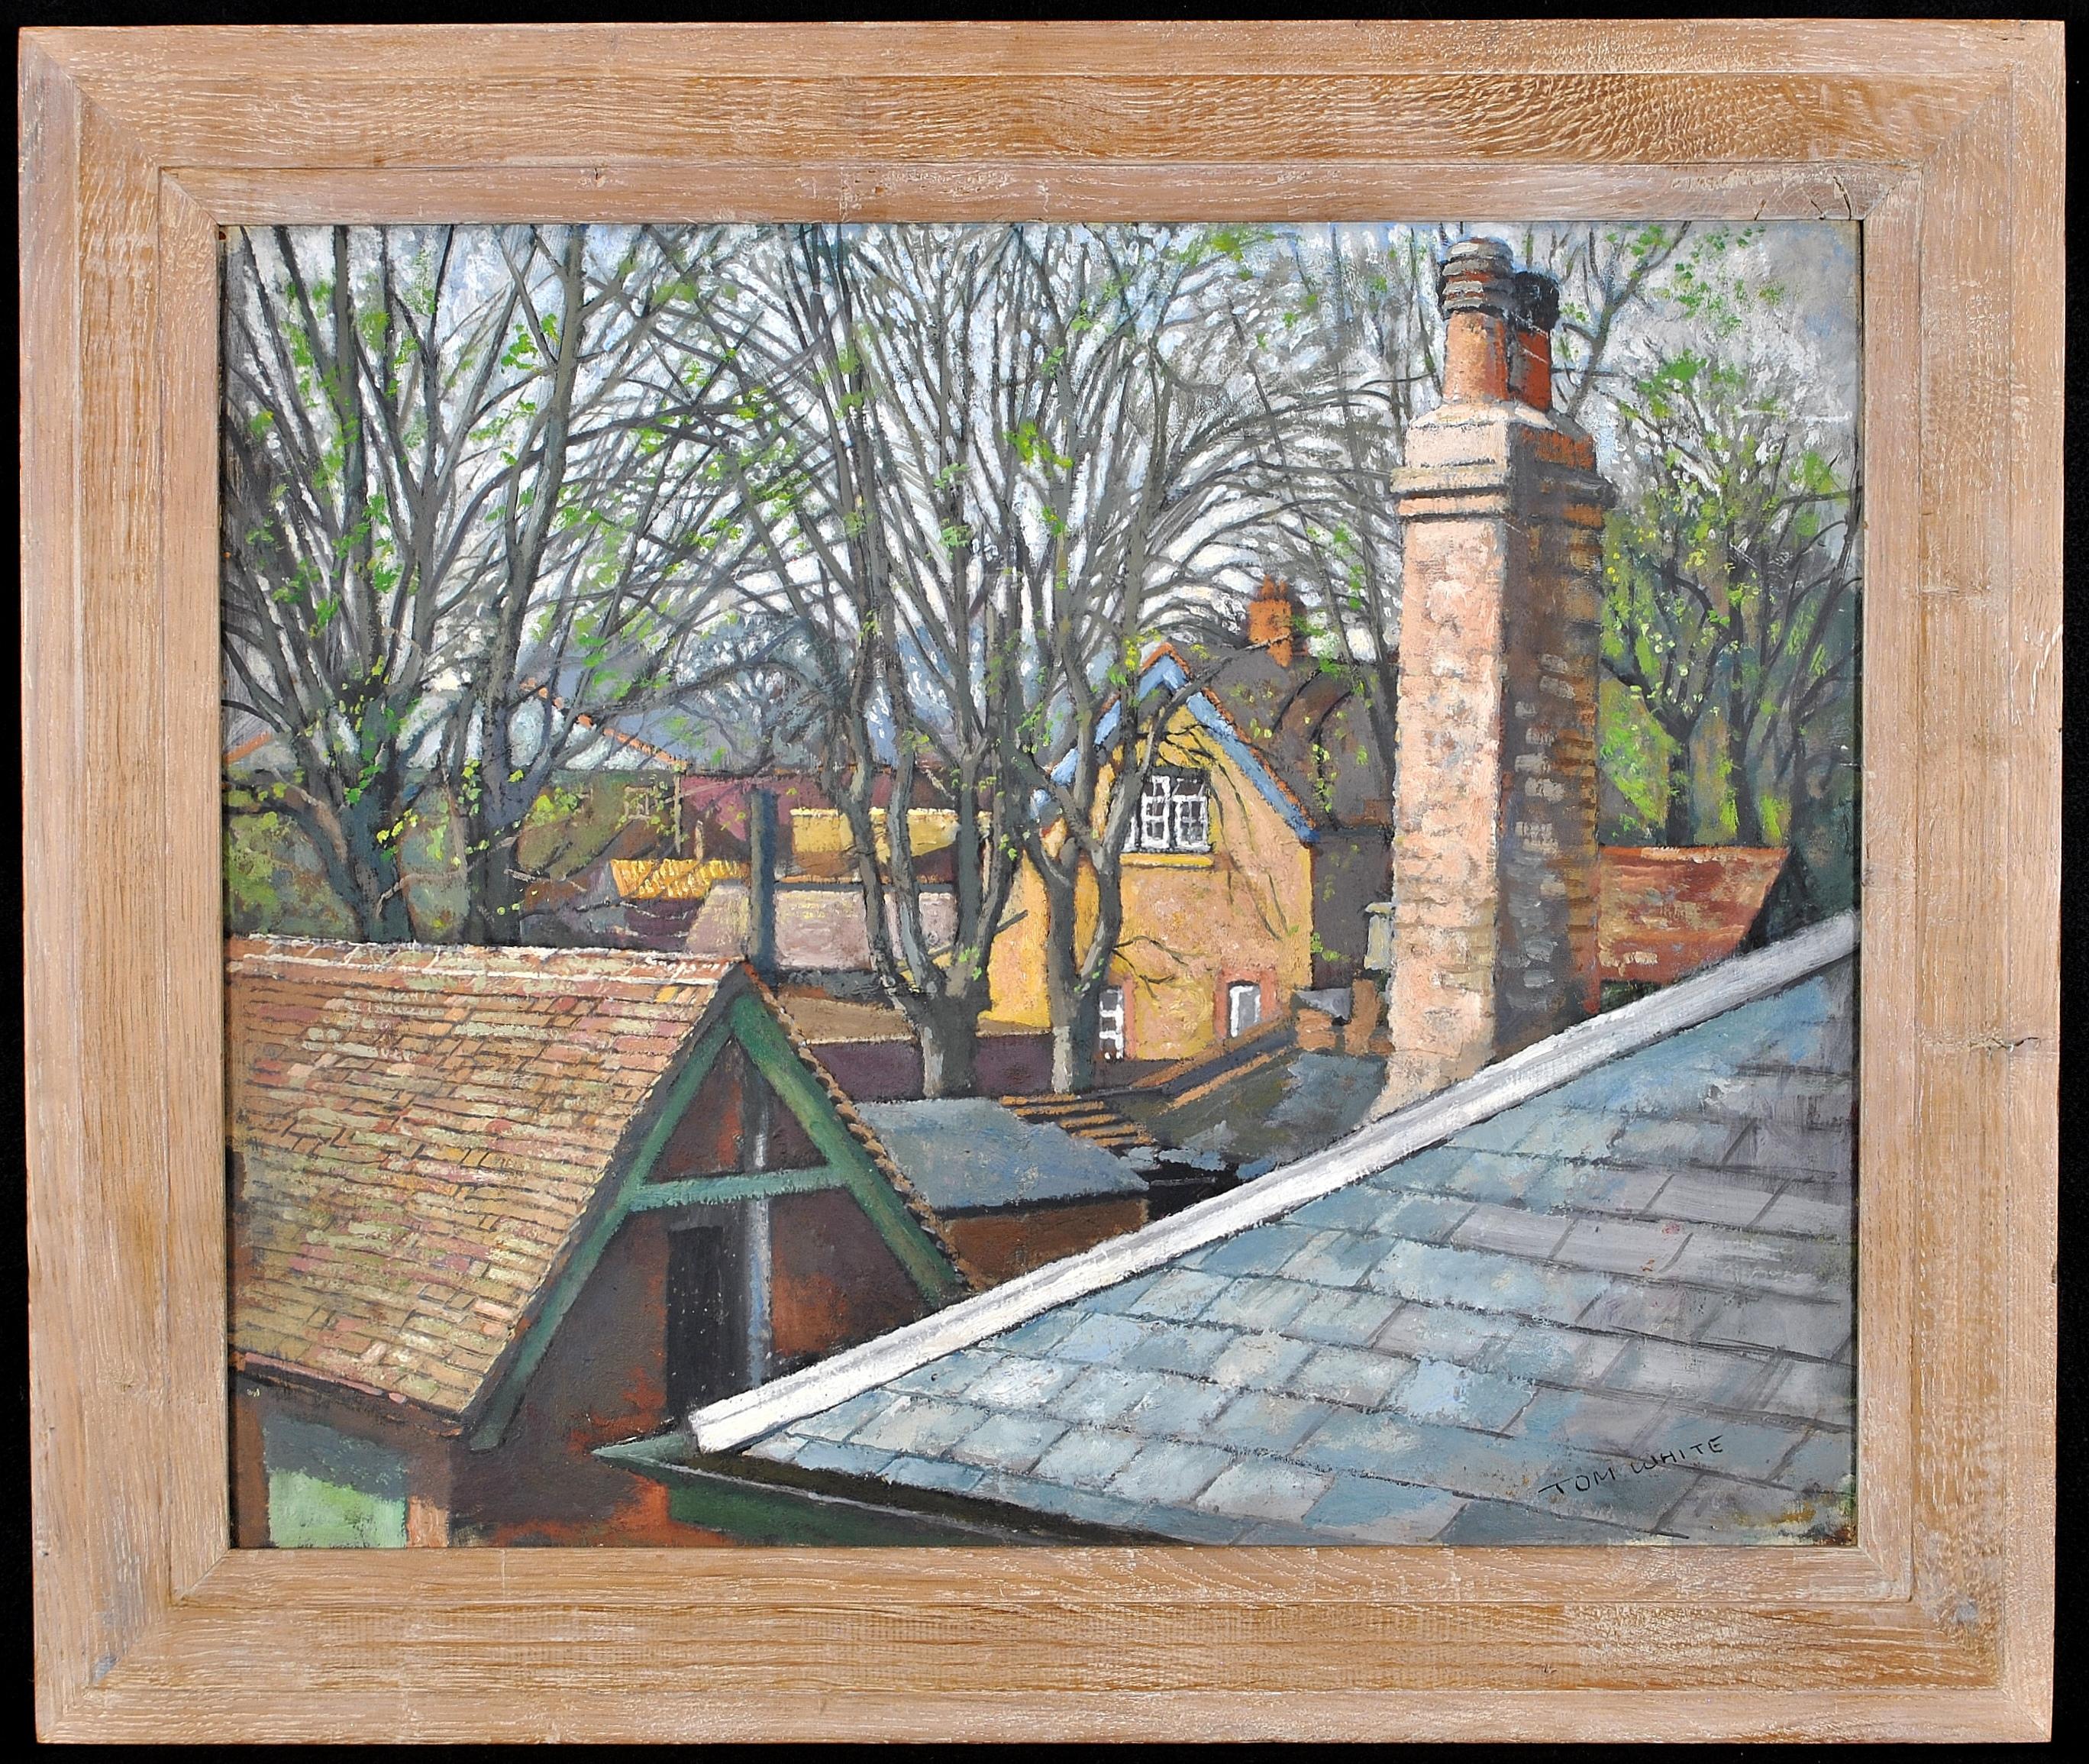 This lovely mid 20th century English oil on board by Tom White depicts a view over the rooftops of period houses in Spring.

A quintessentially English view in the modern/impressionist style that was typical of the period.

The work is signed lower